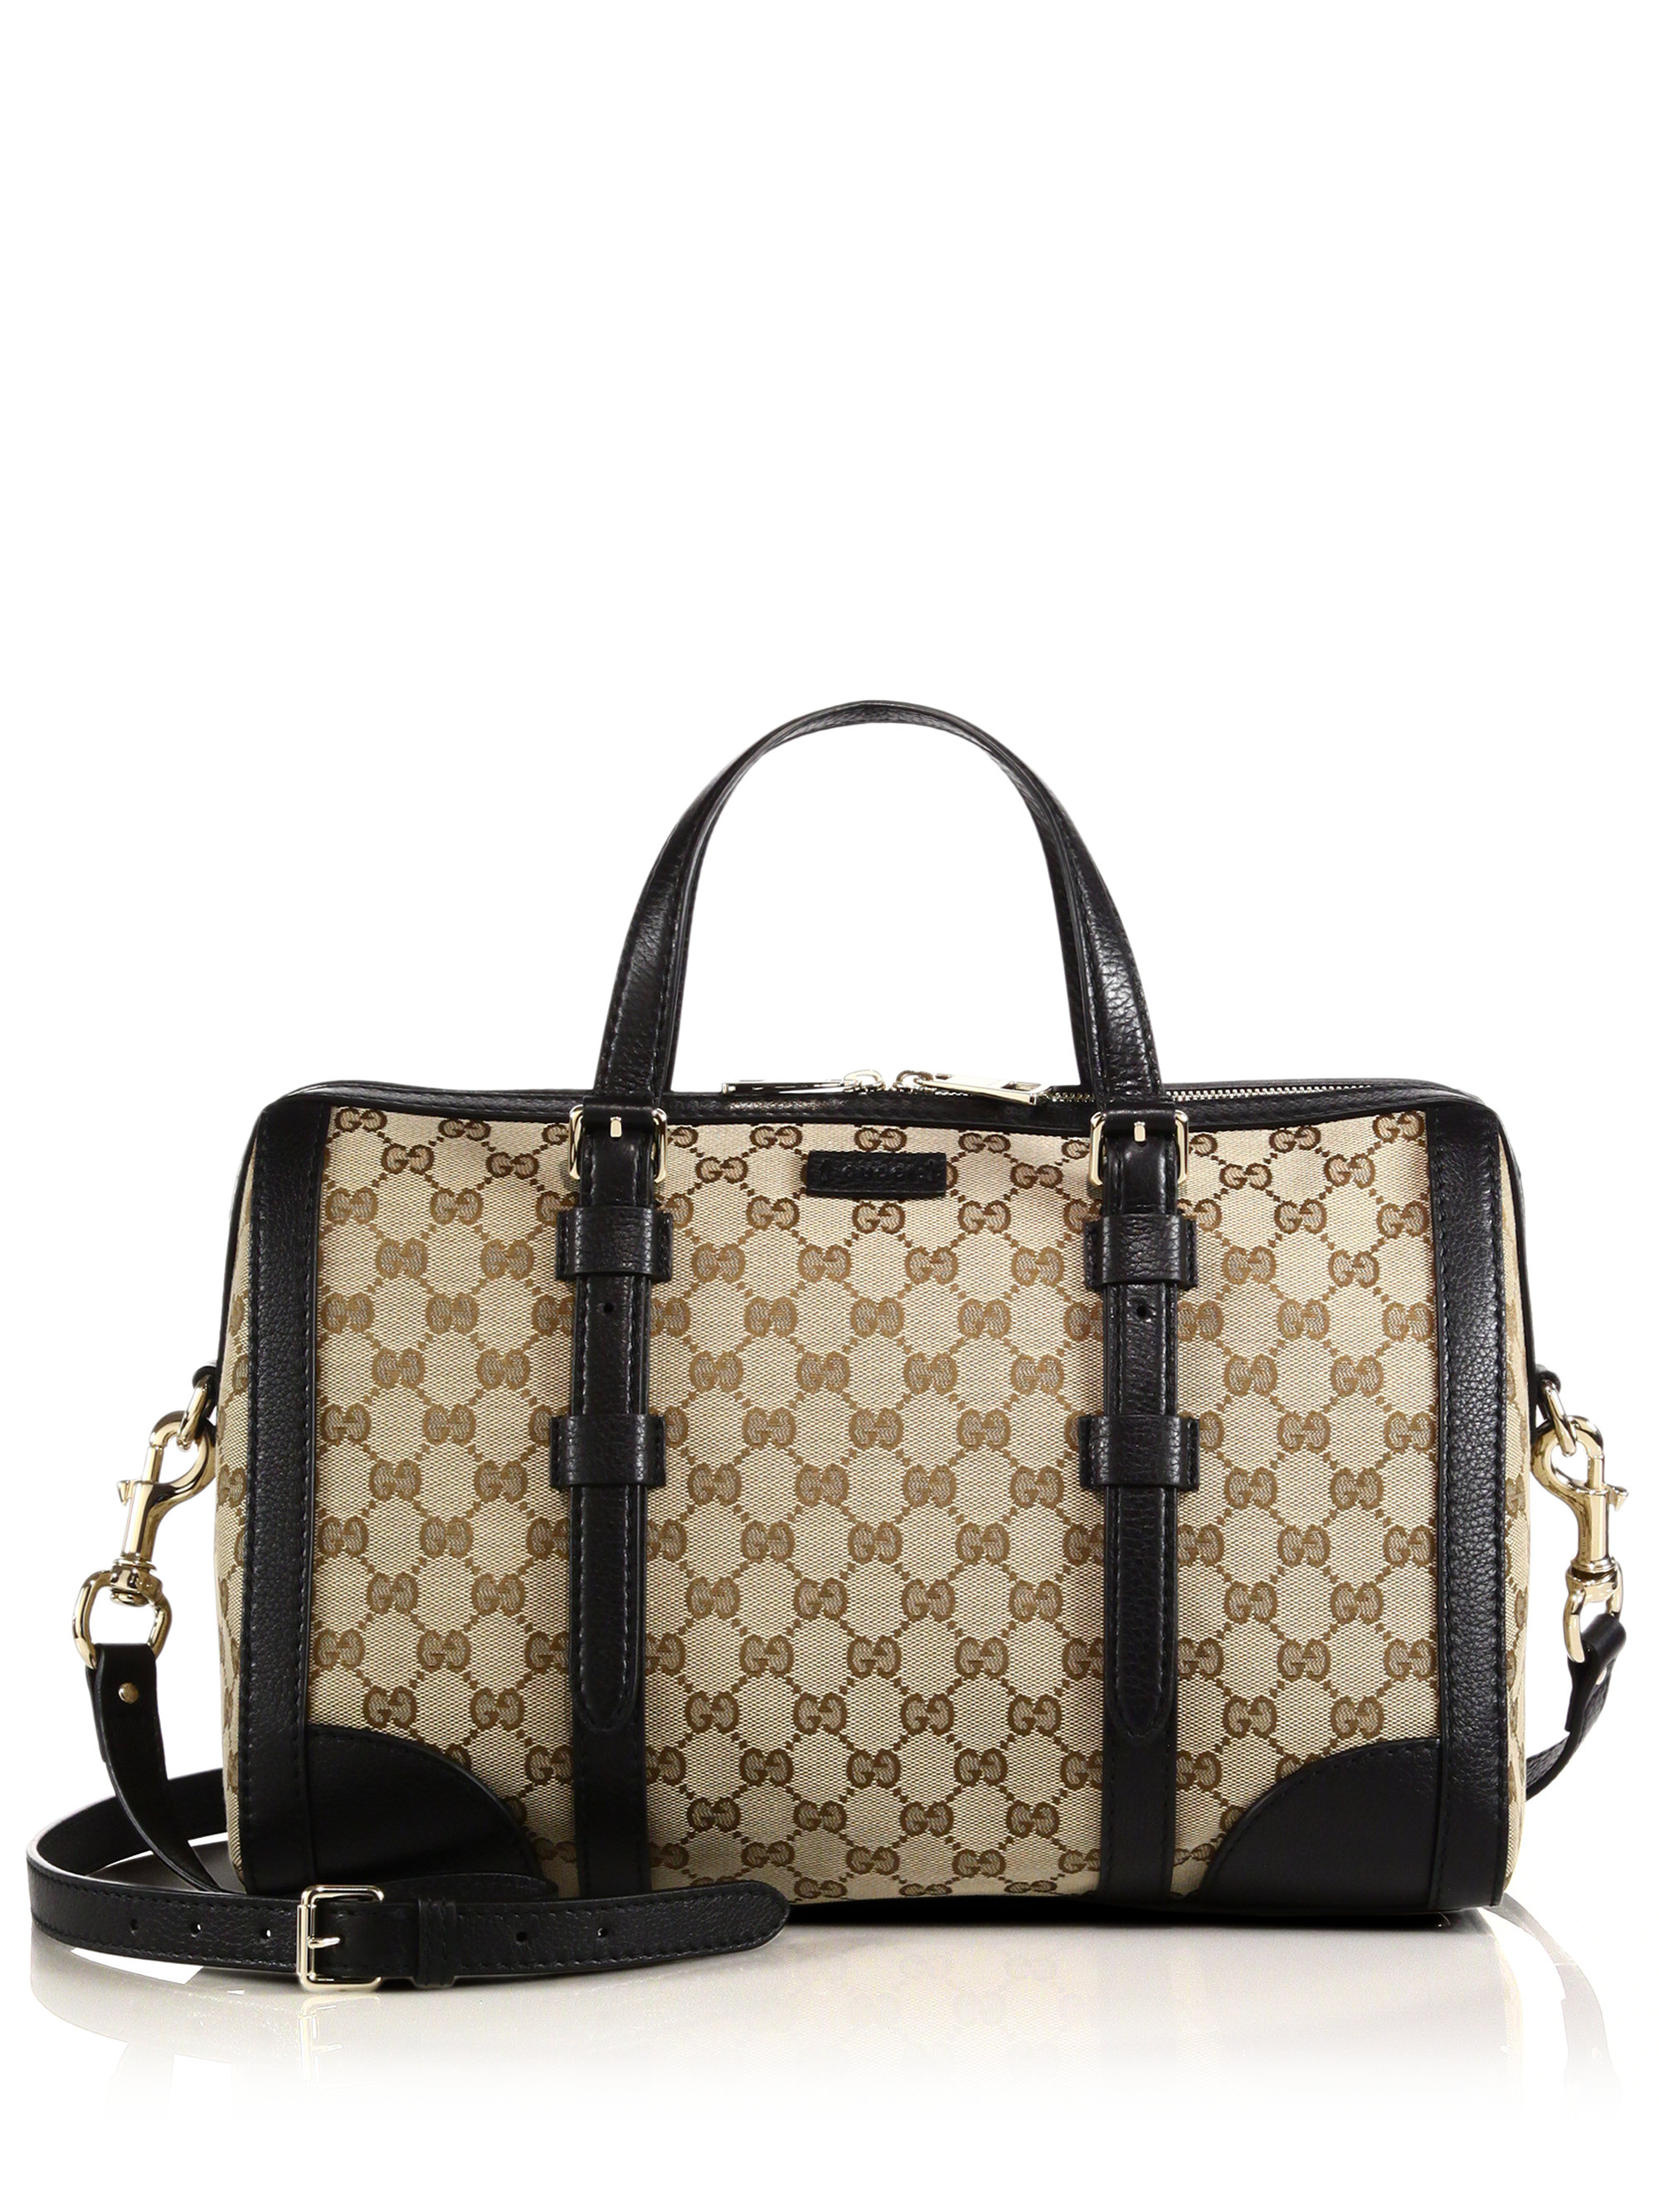 Gucci Gg Classic Top Handle Bag in Natural - Lyst